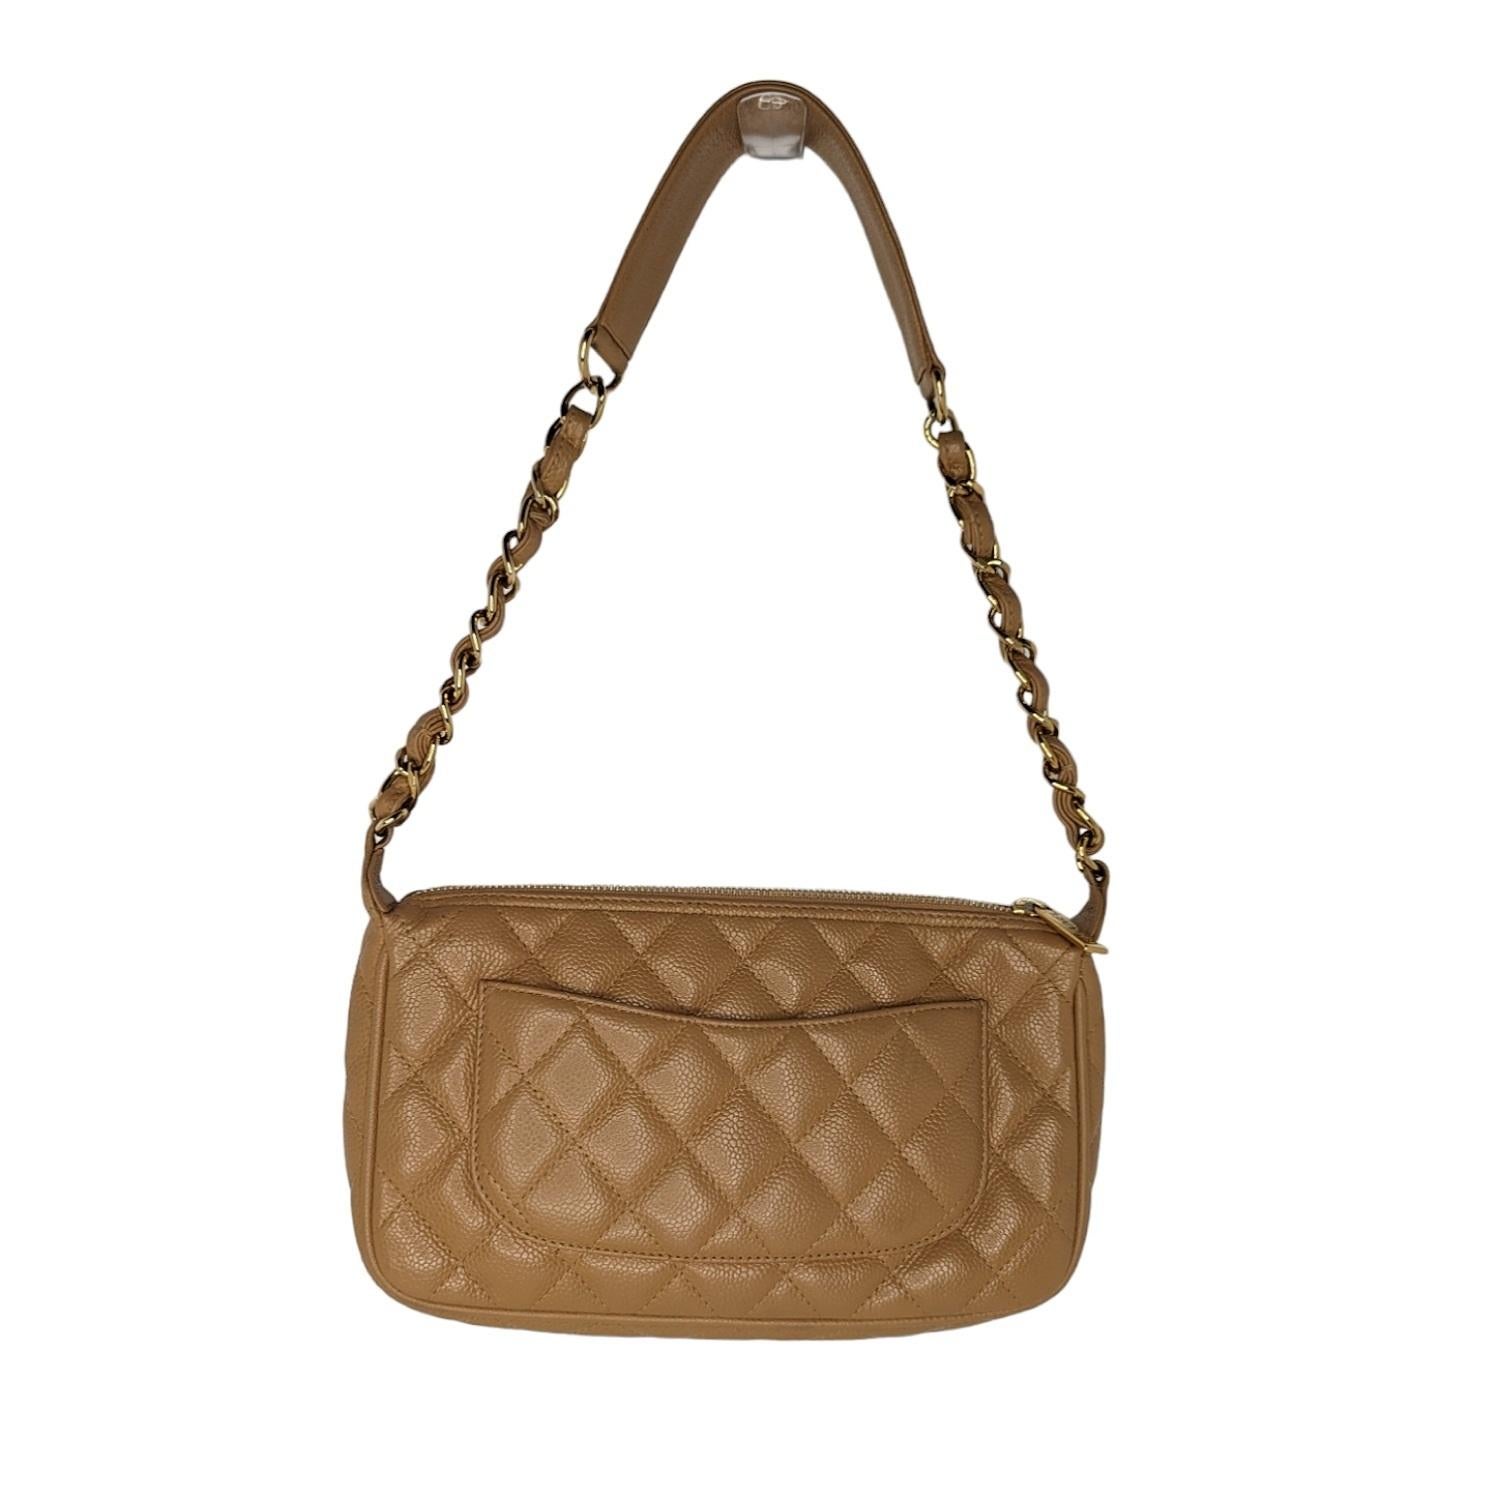 Dark Beige quilted Caviar leather Chanel Timeless hobo with gold-tone hardware, single chain-link and leather shoulder strap, CC logo appliqué at front, exterior patch pocket at back, tonal grosgrain lining, single zip pocket at interior wall and